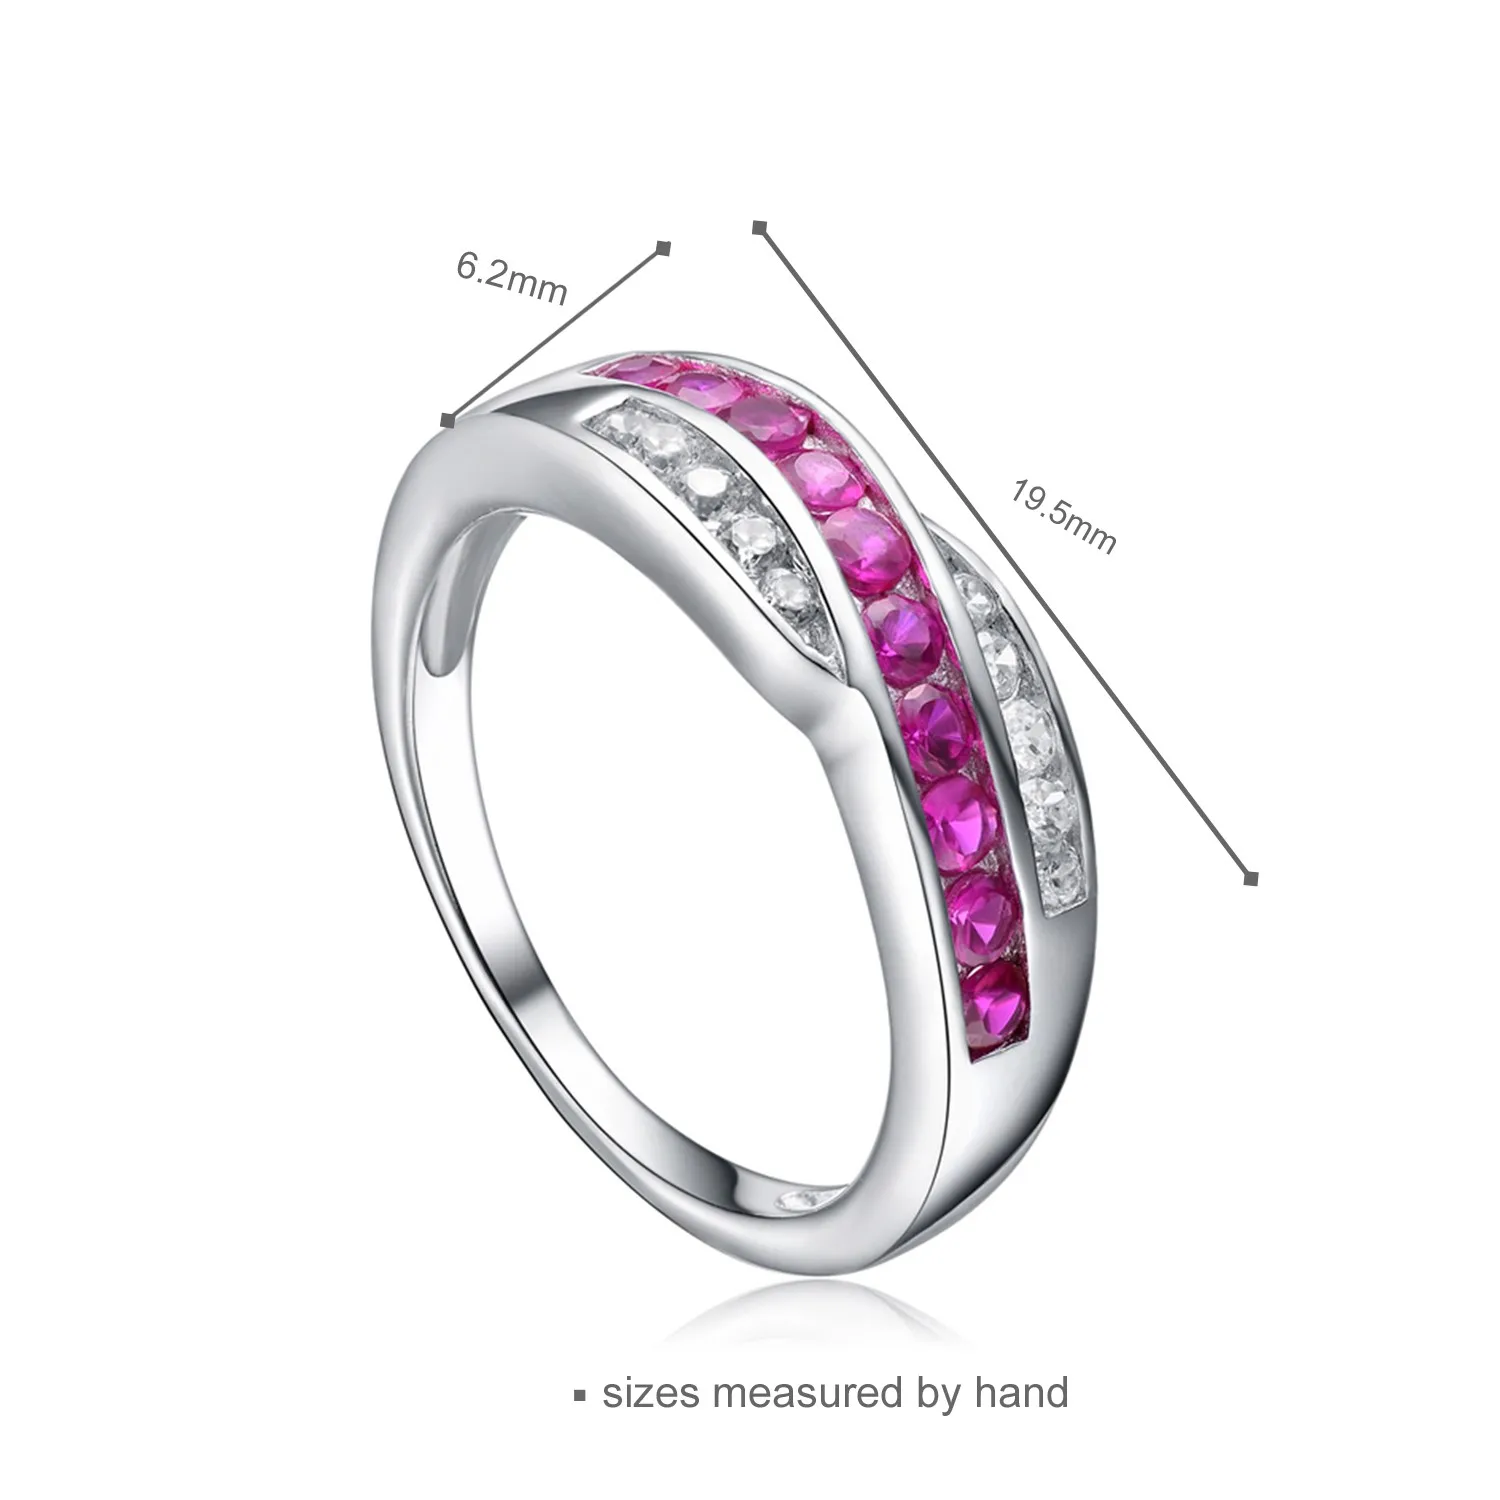 Newest Design Two Tone Ring Fashion Synthetifc Ruby and White Crystal Jewelry Infinity Sign Women En(图3)